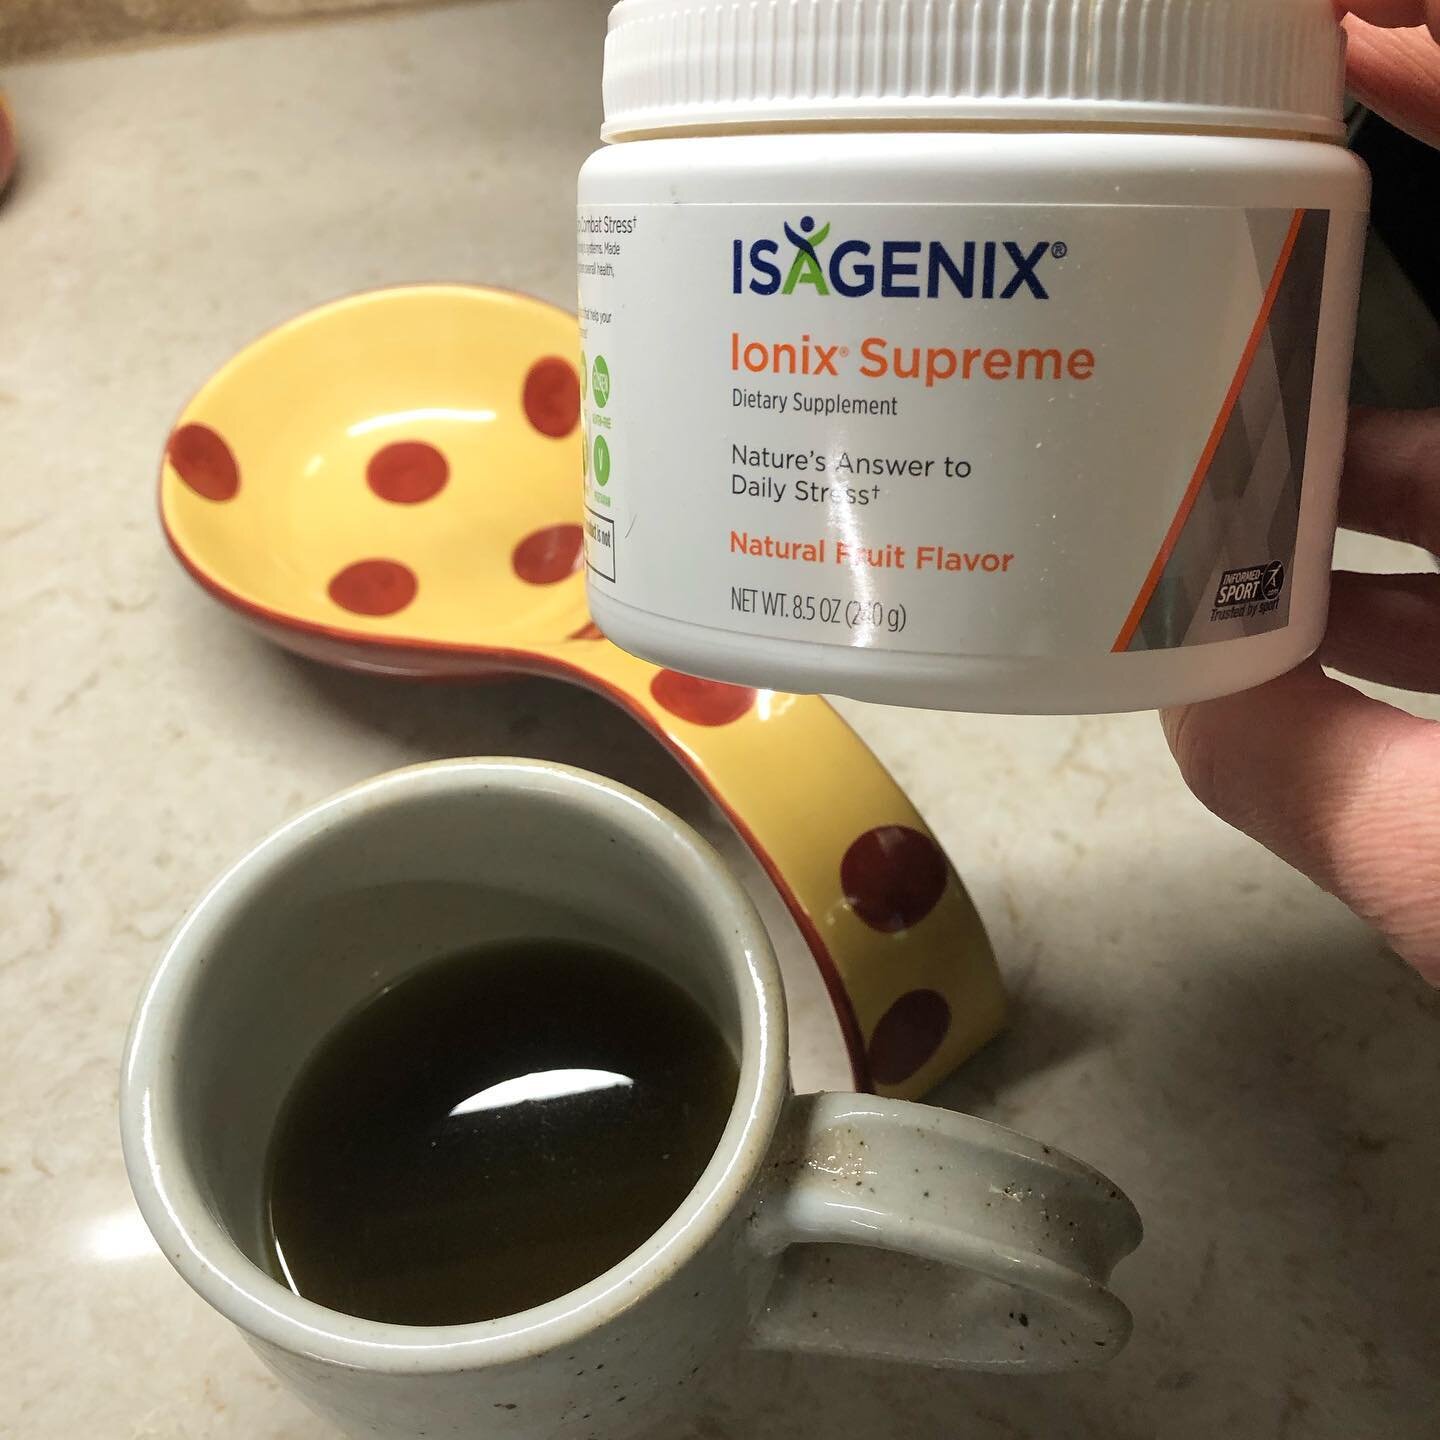 Ionix Supreme-Nature&rsquo;s Answer to Daily Stress! A natural way to reduce the effects of stress and balance you body&rsquo;s systems. Made with adaptogens, antioxidants and nutrients to help you strengthen overall health, sharpen mental focus and 